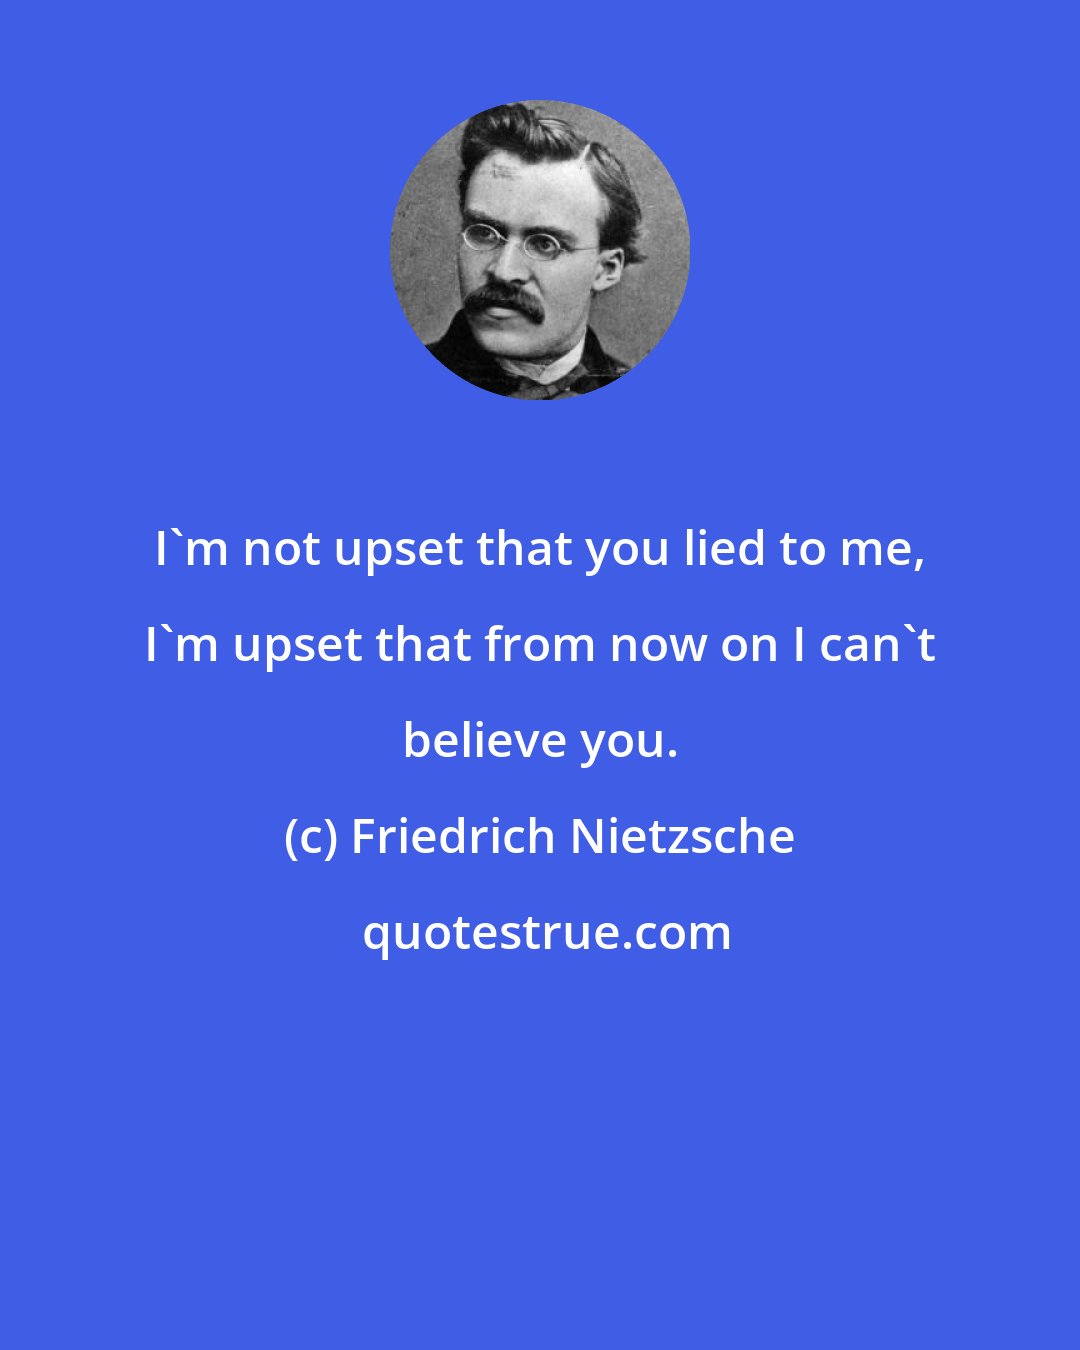 Friedrich Nietzsche: I'm not upset that you lied to me, I'm upset that from now on I can't believe you.